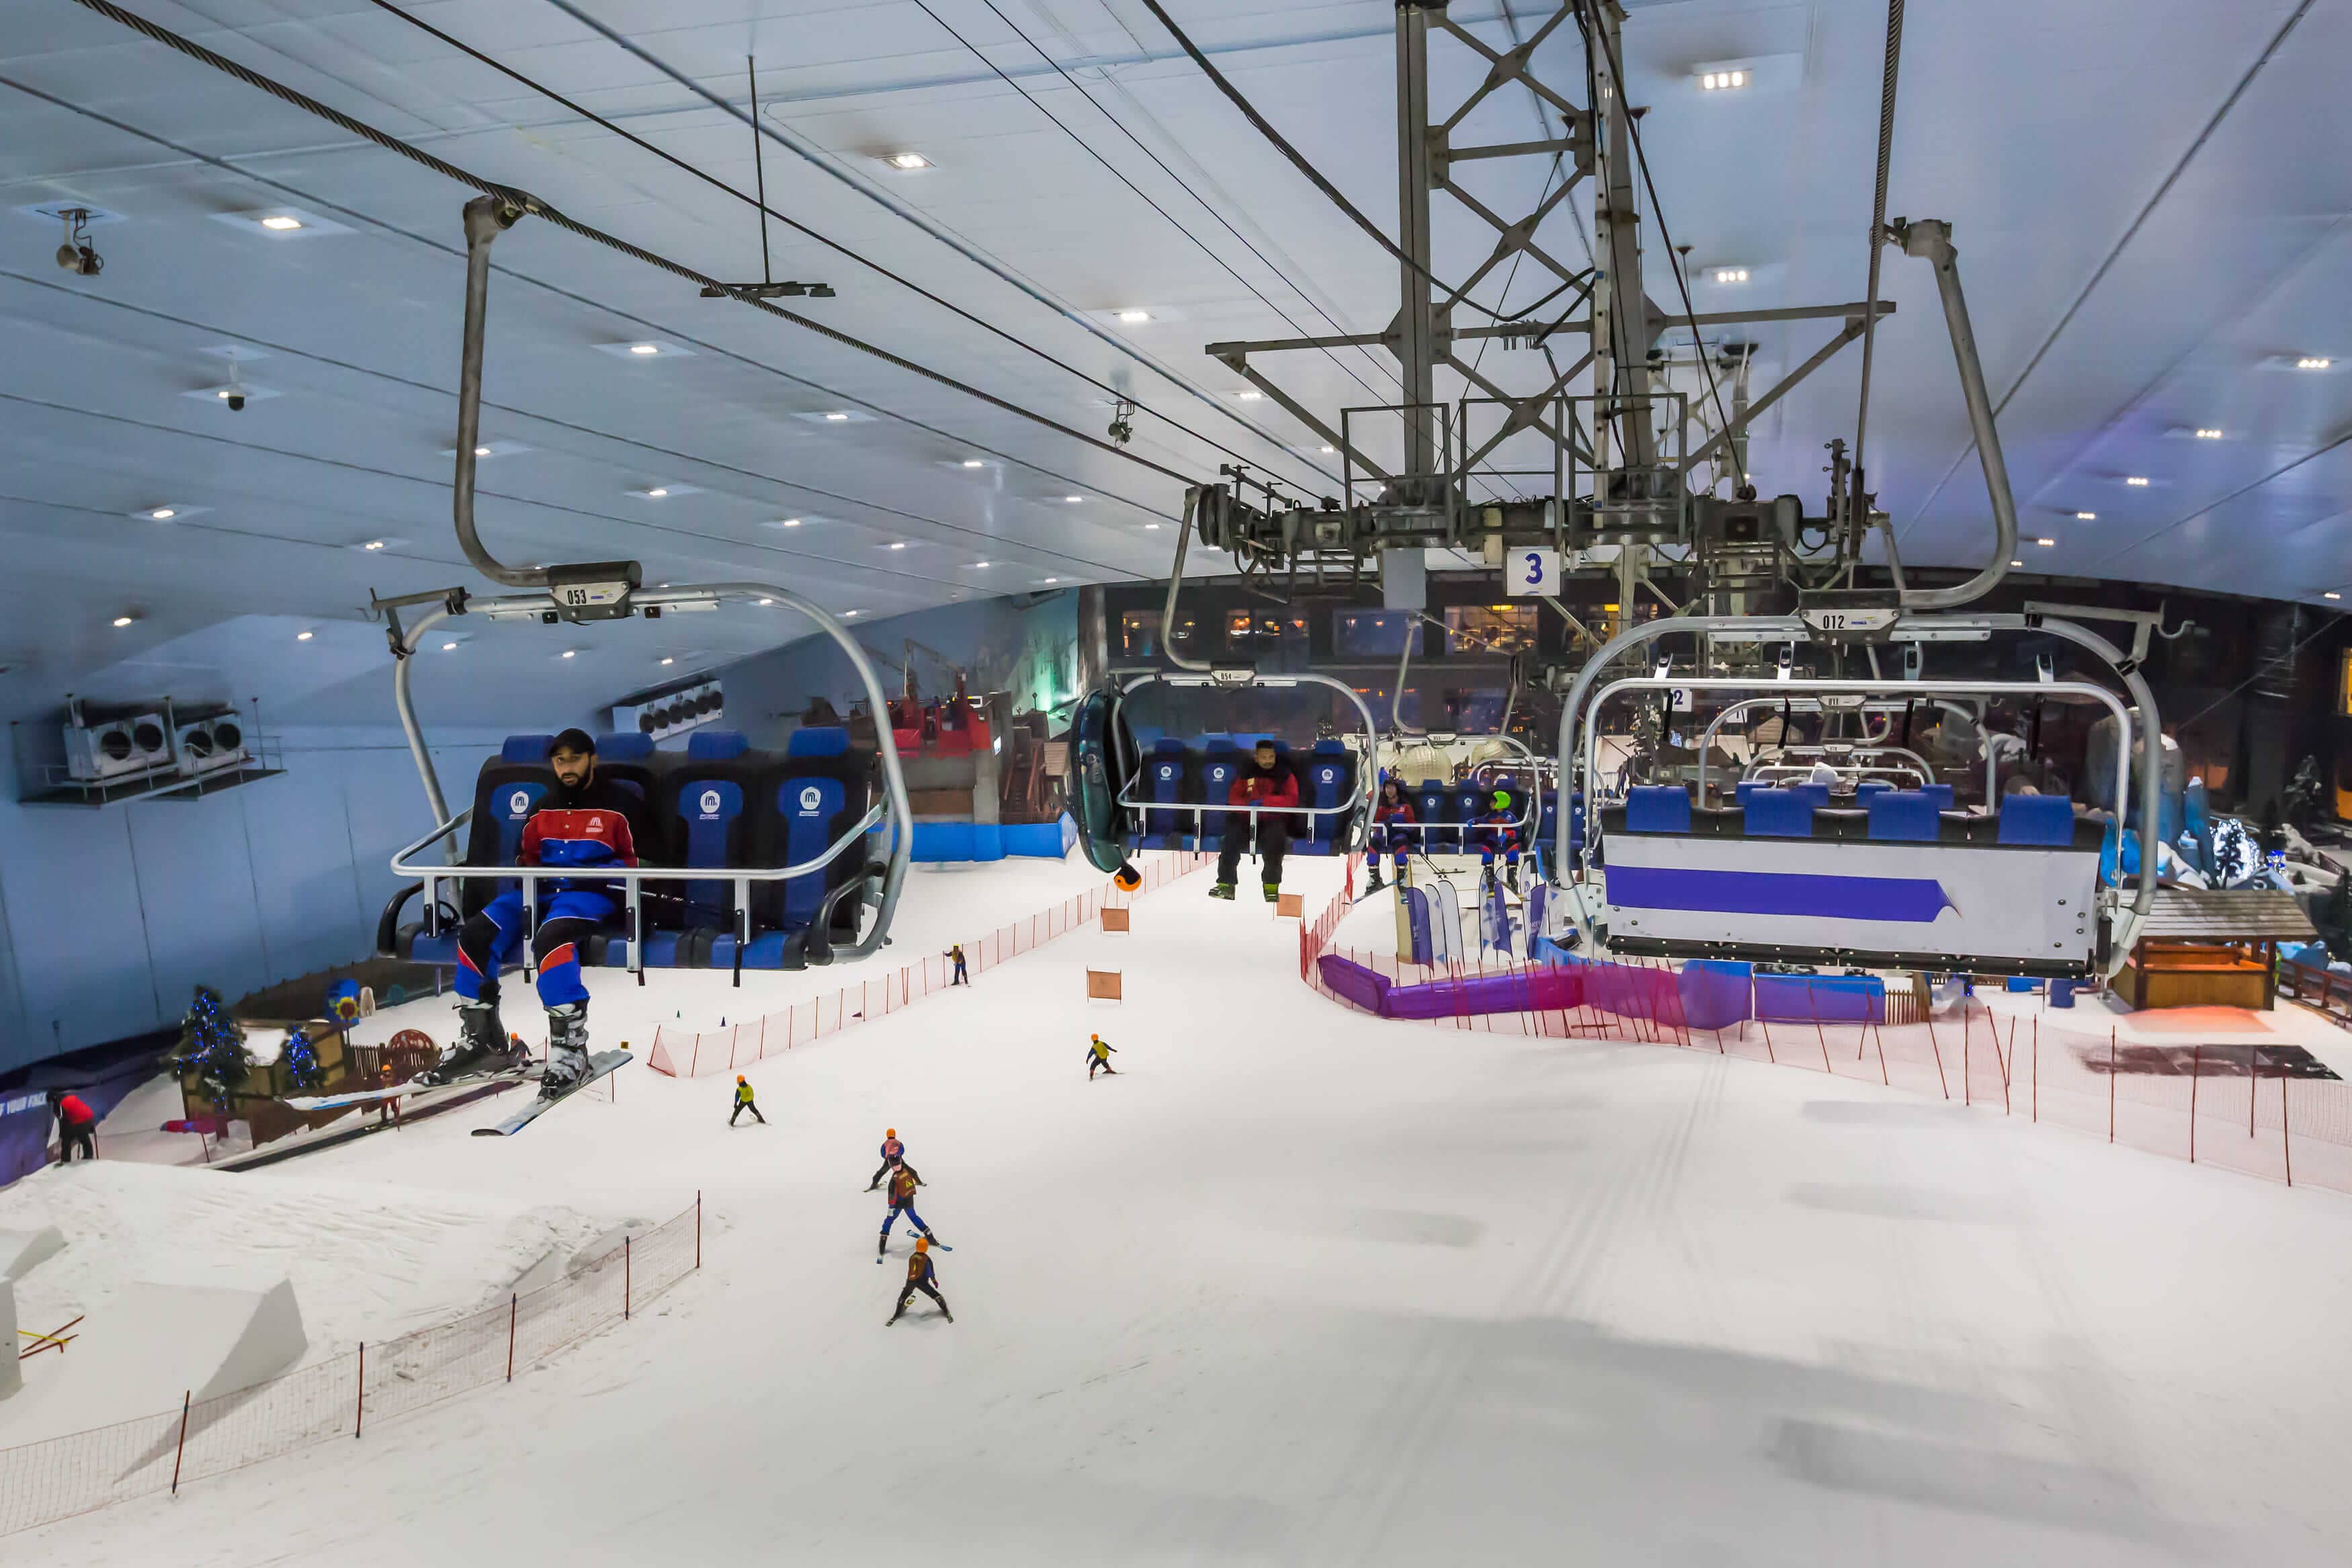 Dubai City Tour With Skiing In The Mall Of Emirates